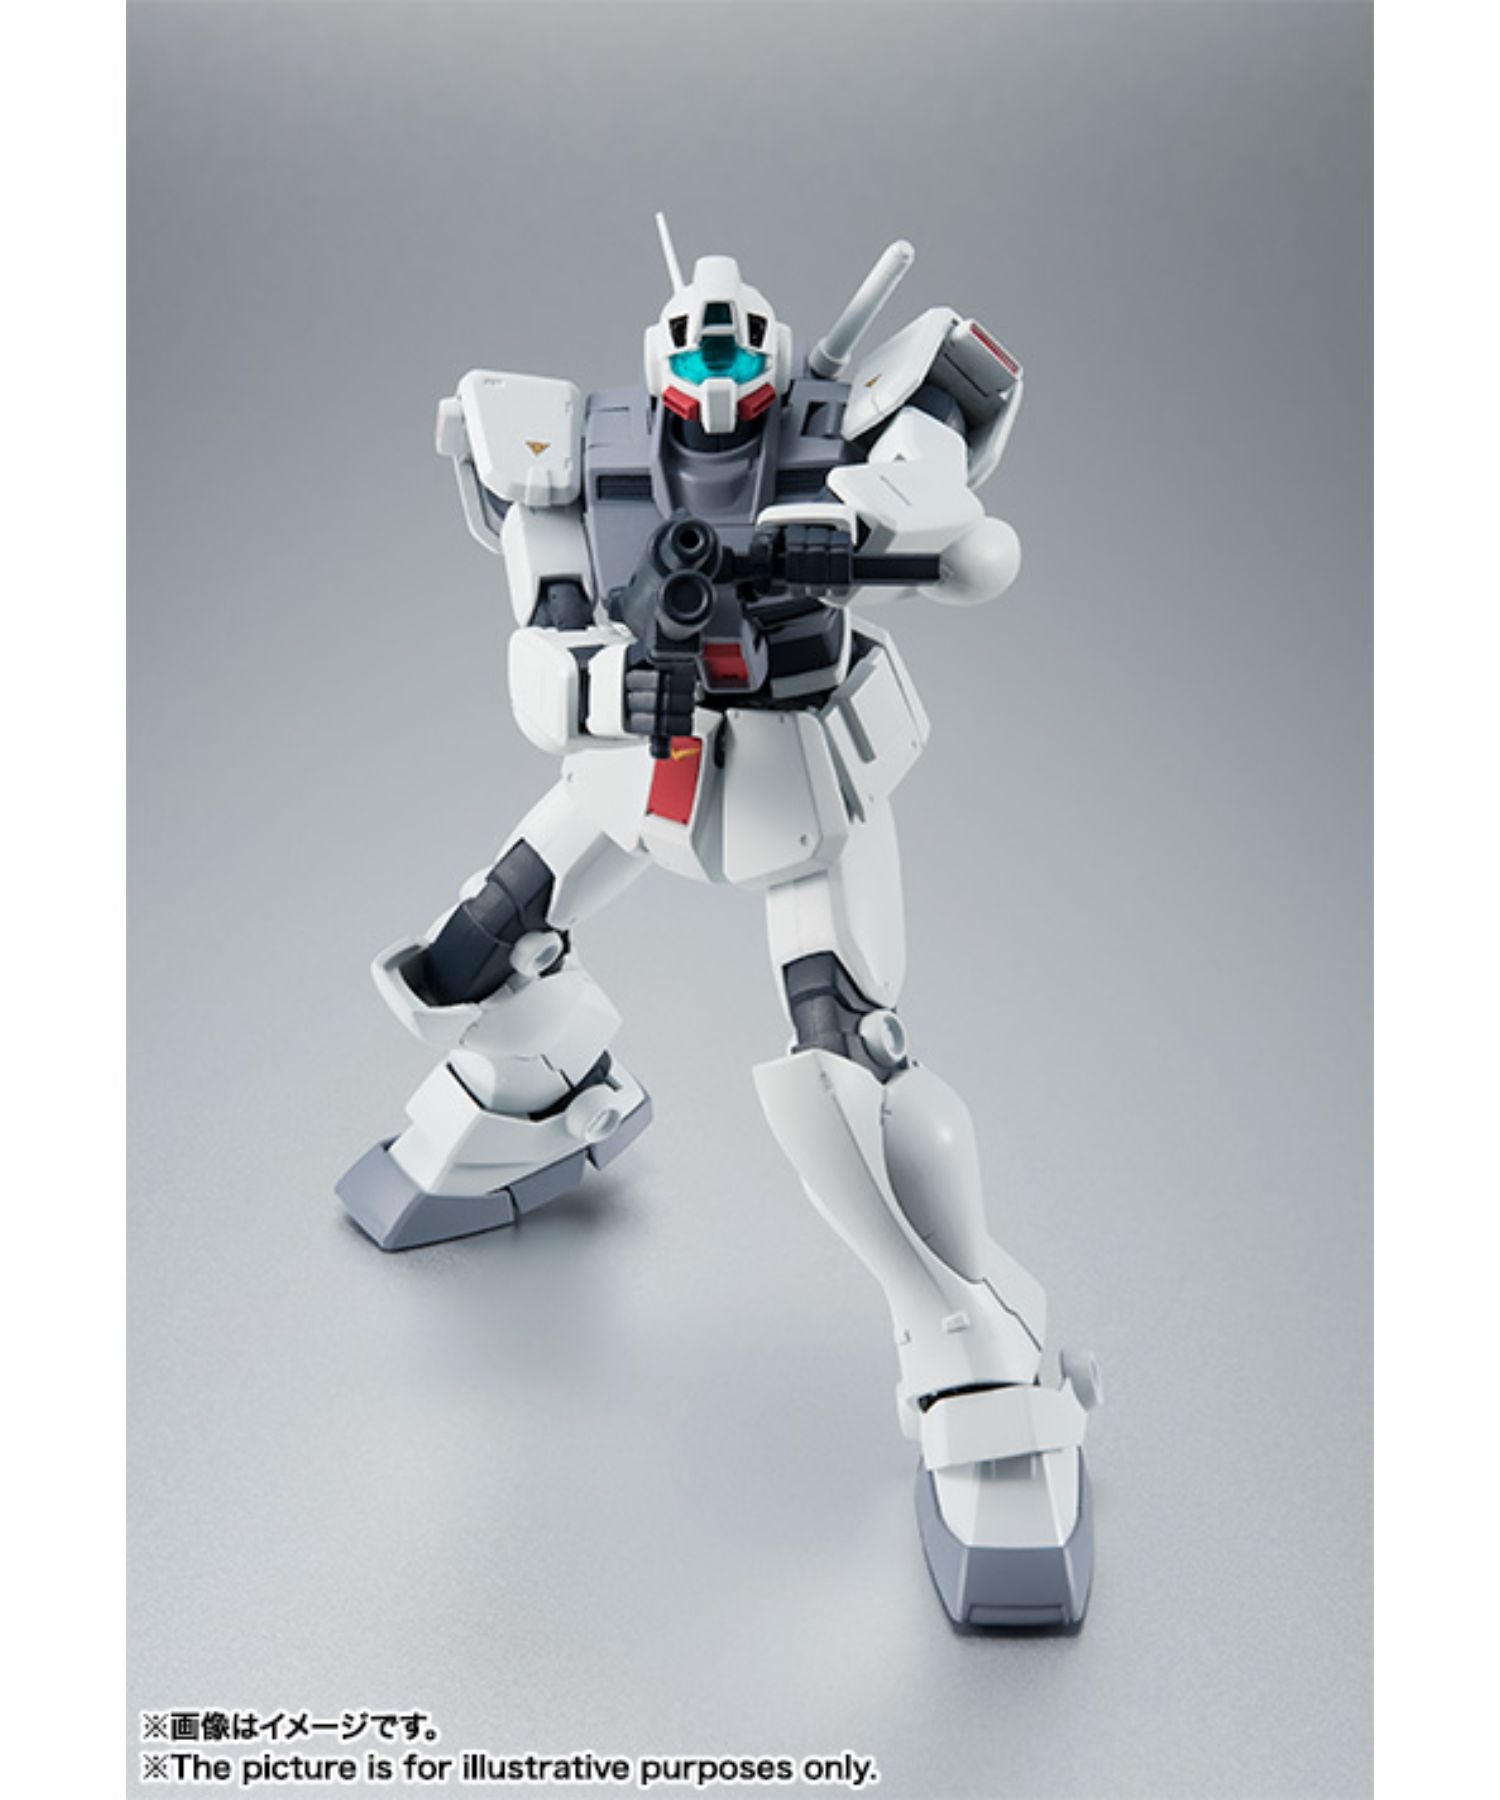 ＜Side Ms＞Rgm-79D ジム寒冷地仕様 Ver. A.N.I.M.E.